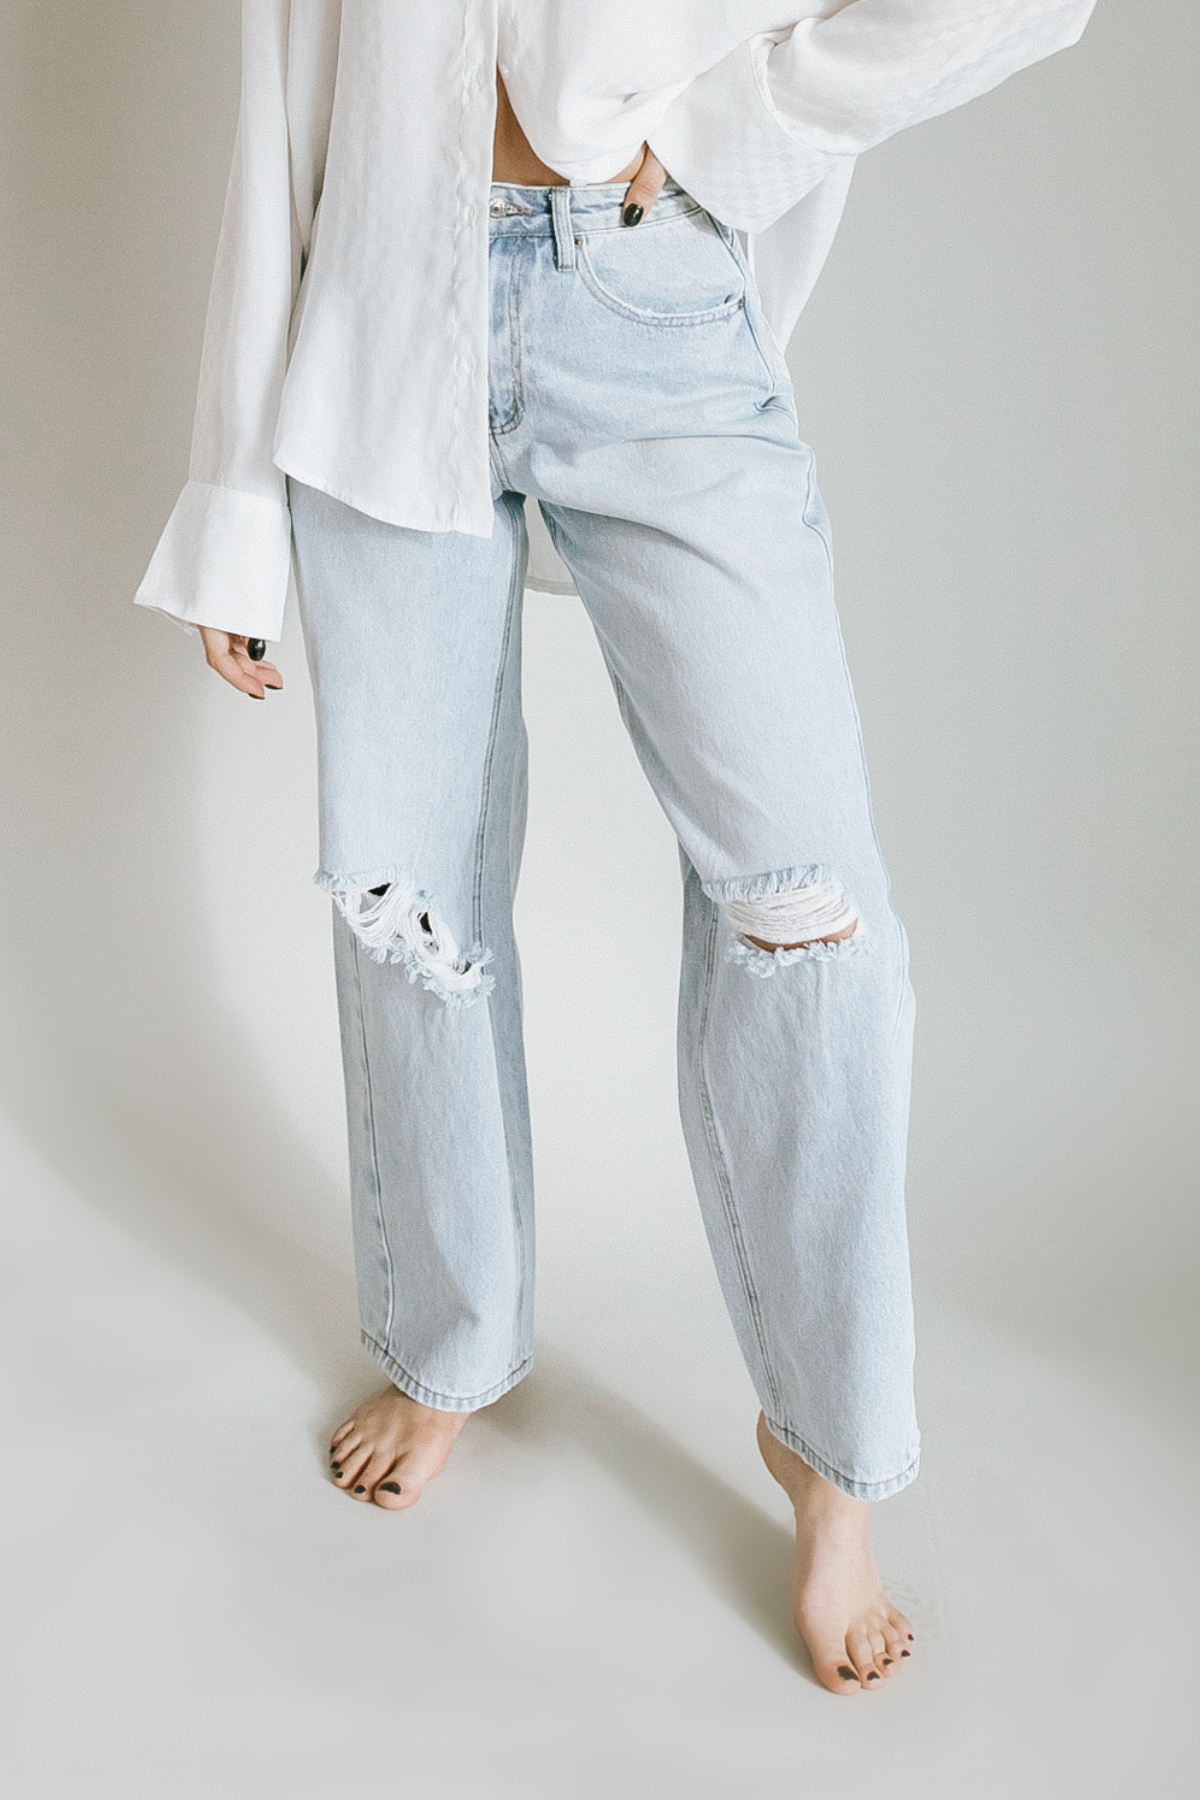 Jean West - Shop Relaxed Denim THELIFESTYLEDCO - Coast